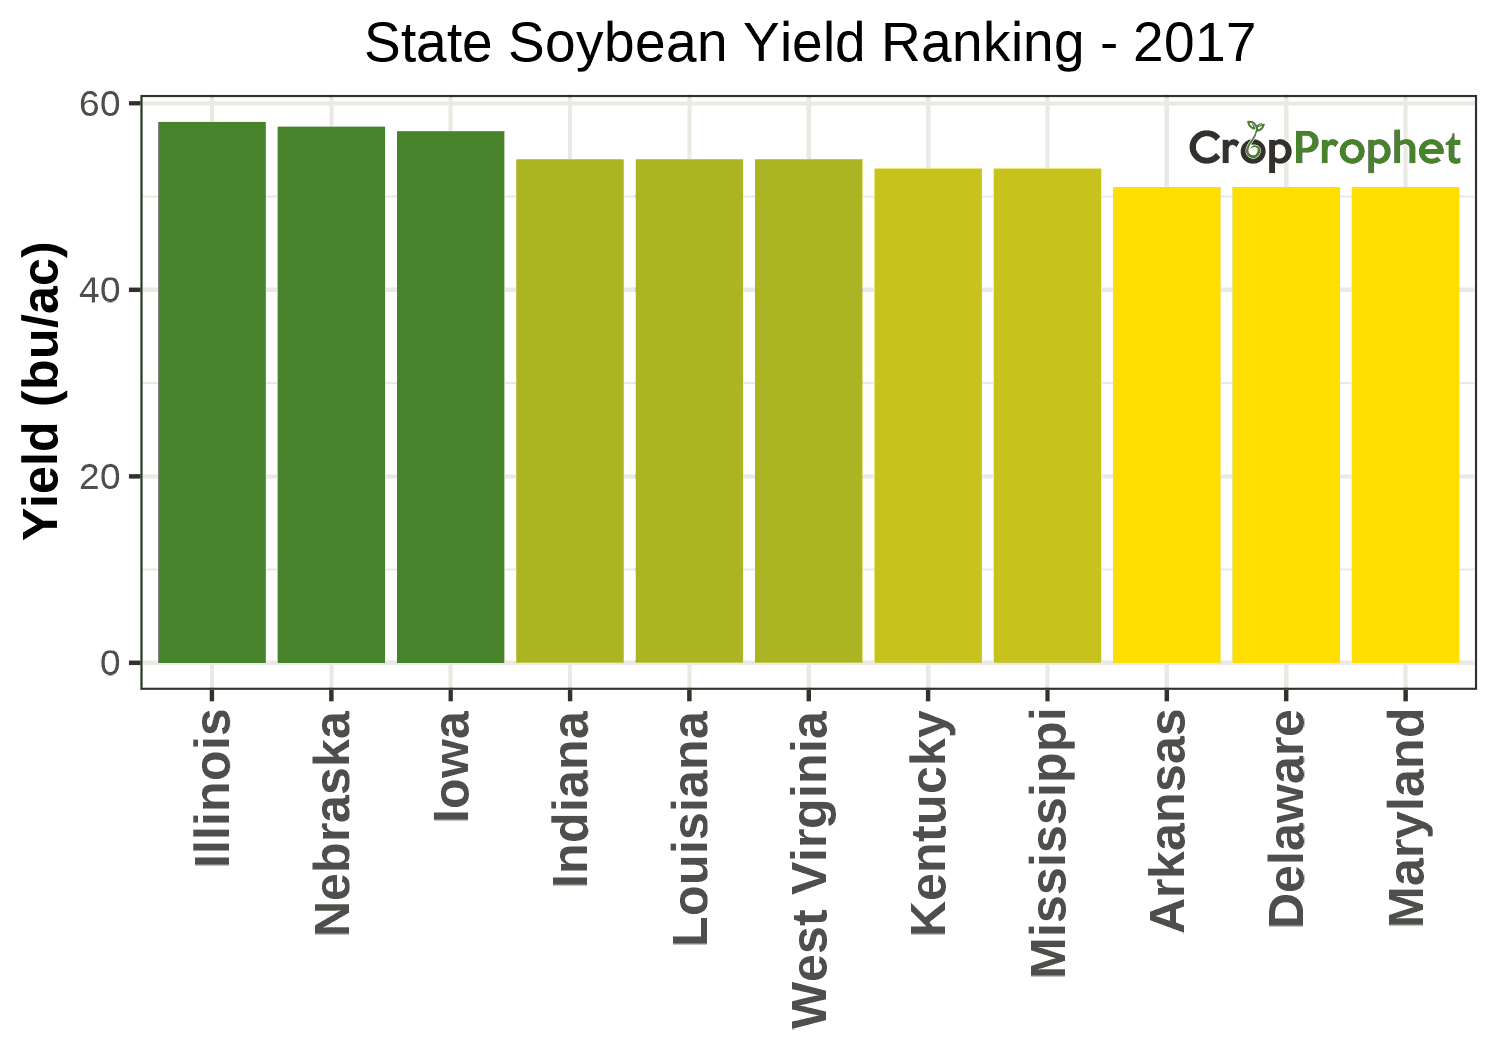 Soybean Production by State - 2017 Rankings